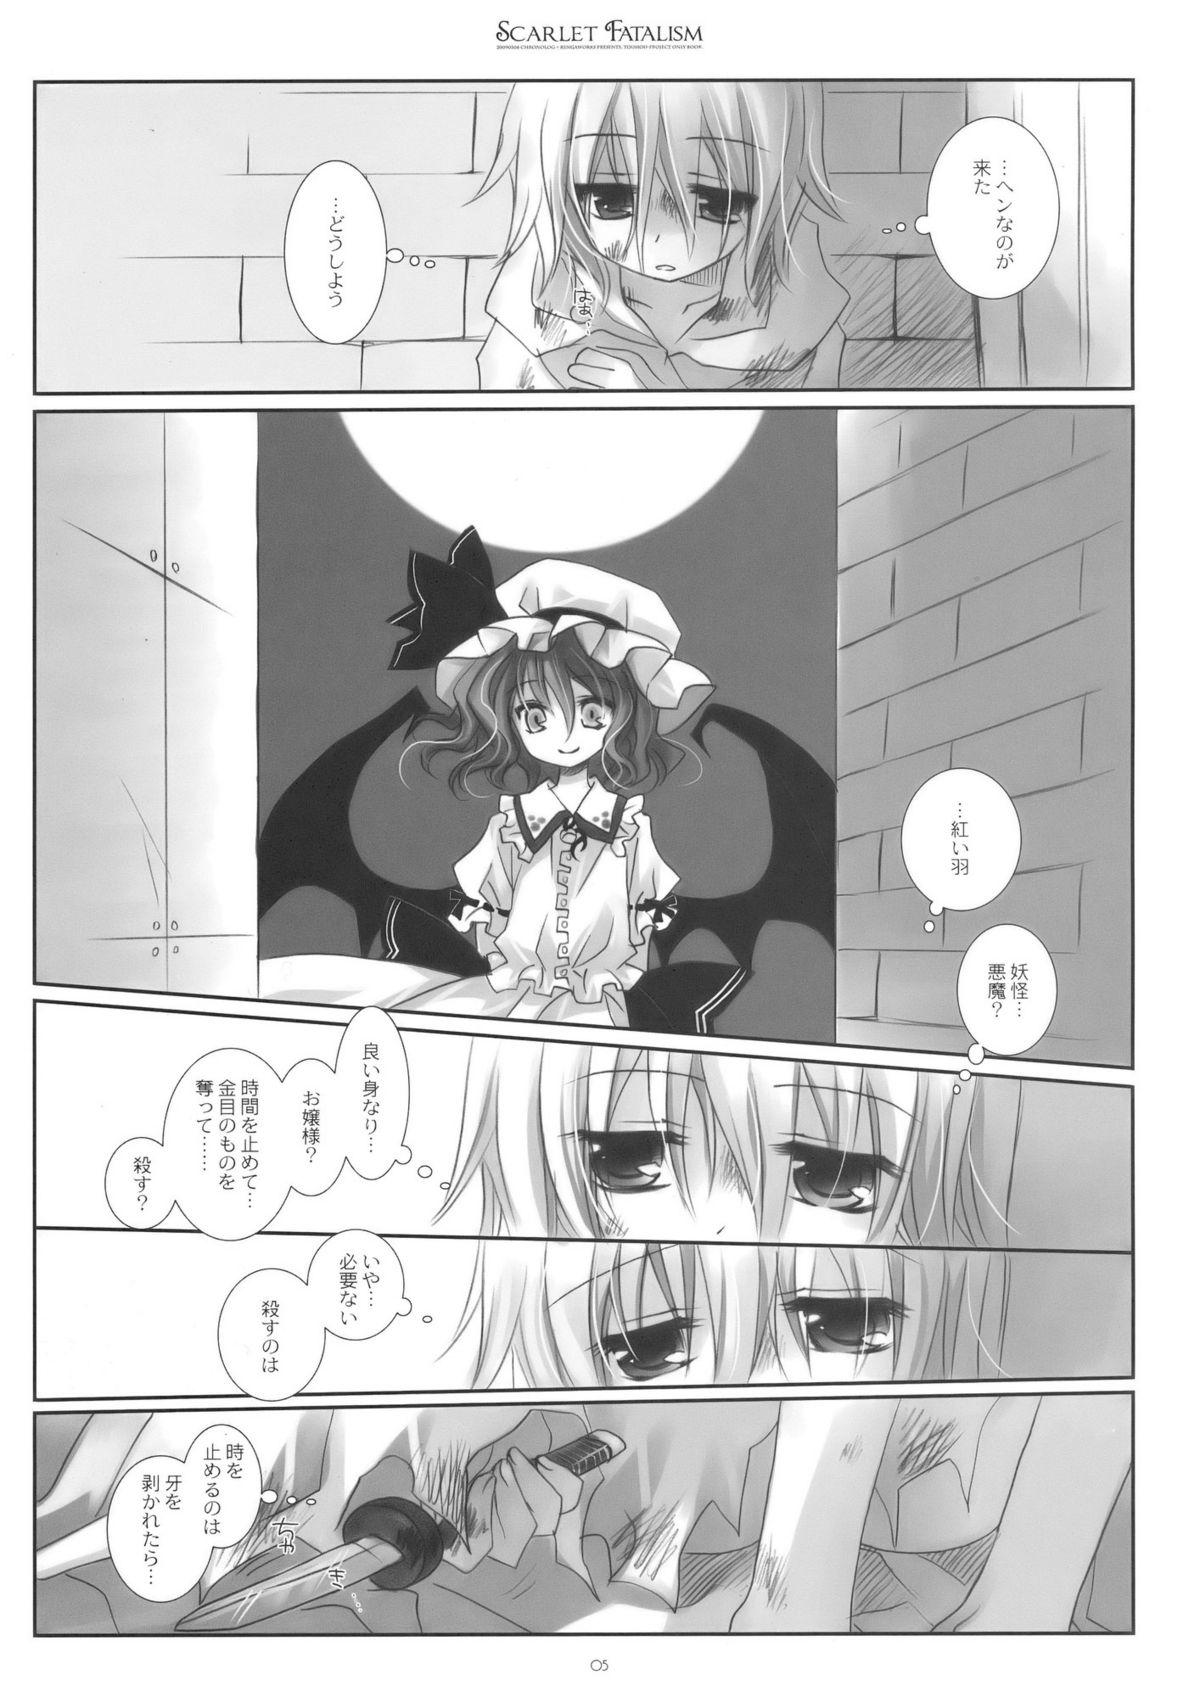 3some Scarlet Fatalism - Touhou project Gay Fucking - Page 5